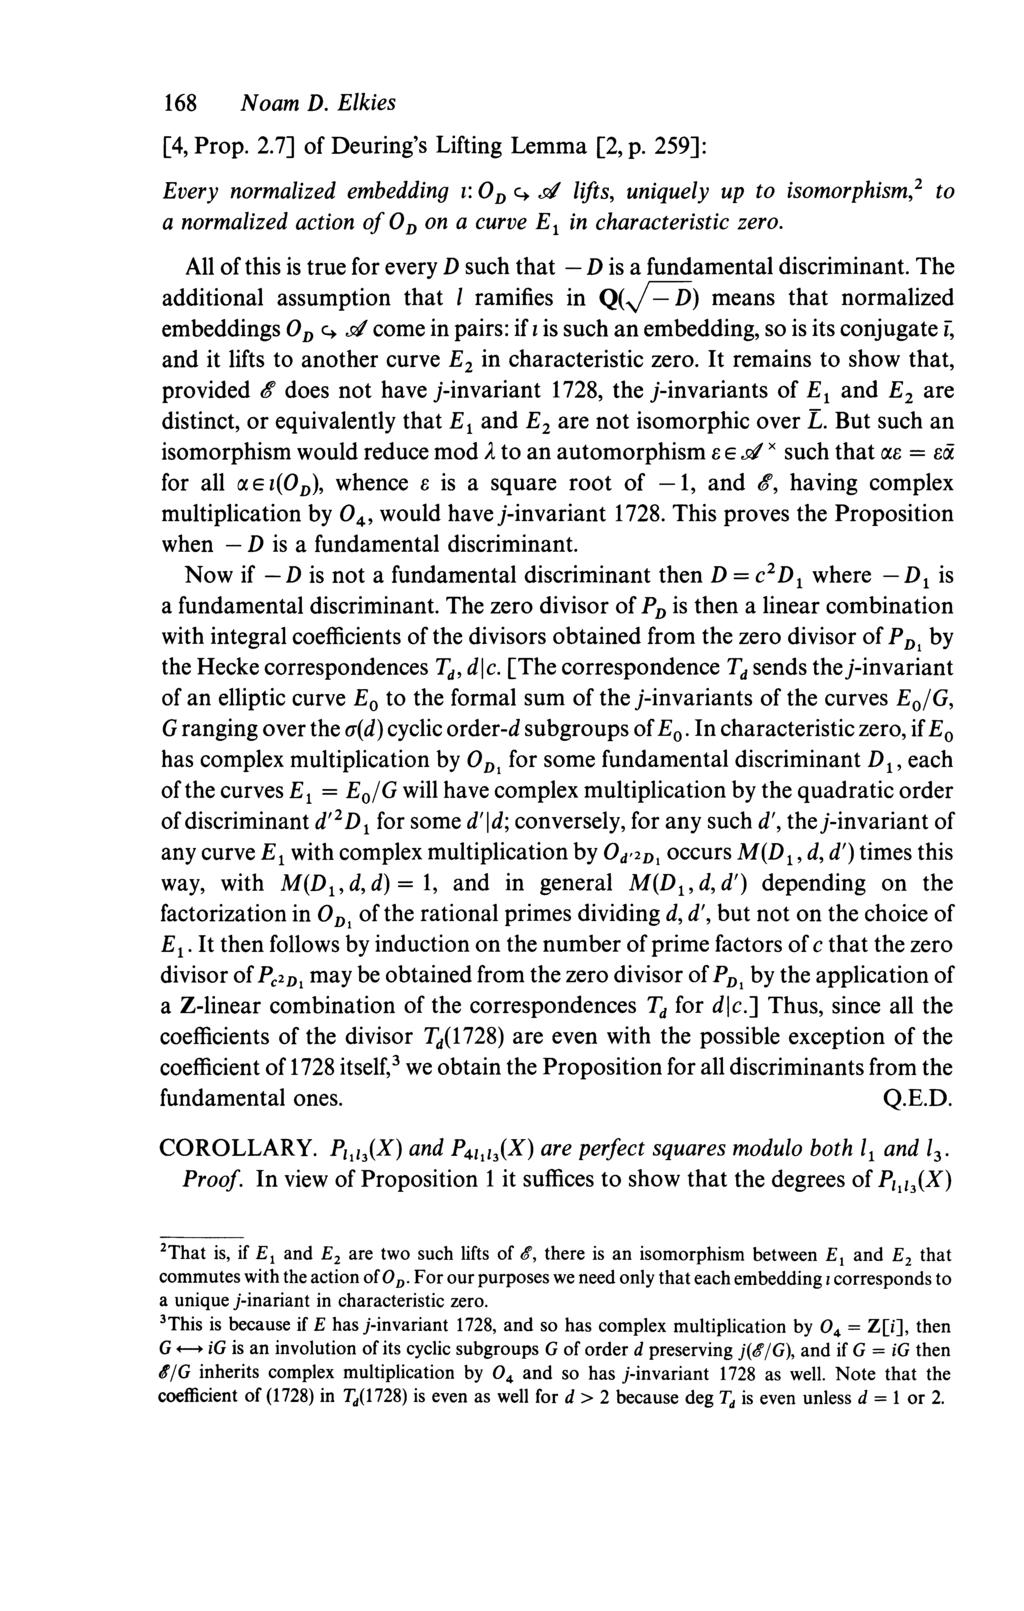 168 [4, Prop. 2.7] of Deuring s Lifting Lemma [2, p. 259]: Every normalized embedding 1: OD CI.91 lifts, uniquely up to isomorphism,2 to a normalized action of OD on a curve El in characteristic zero.